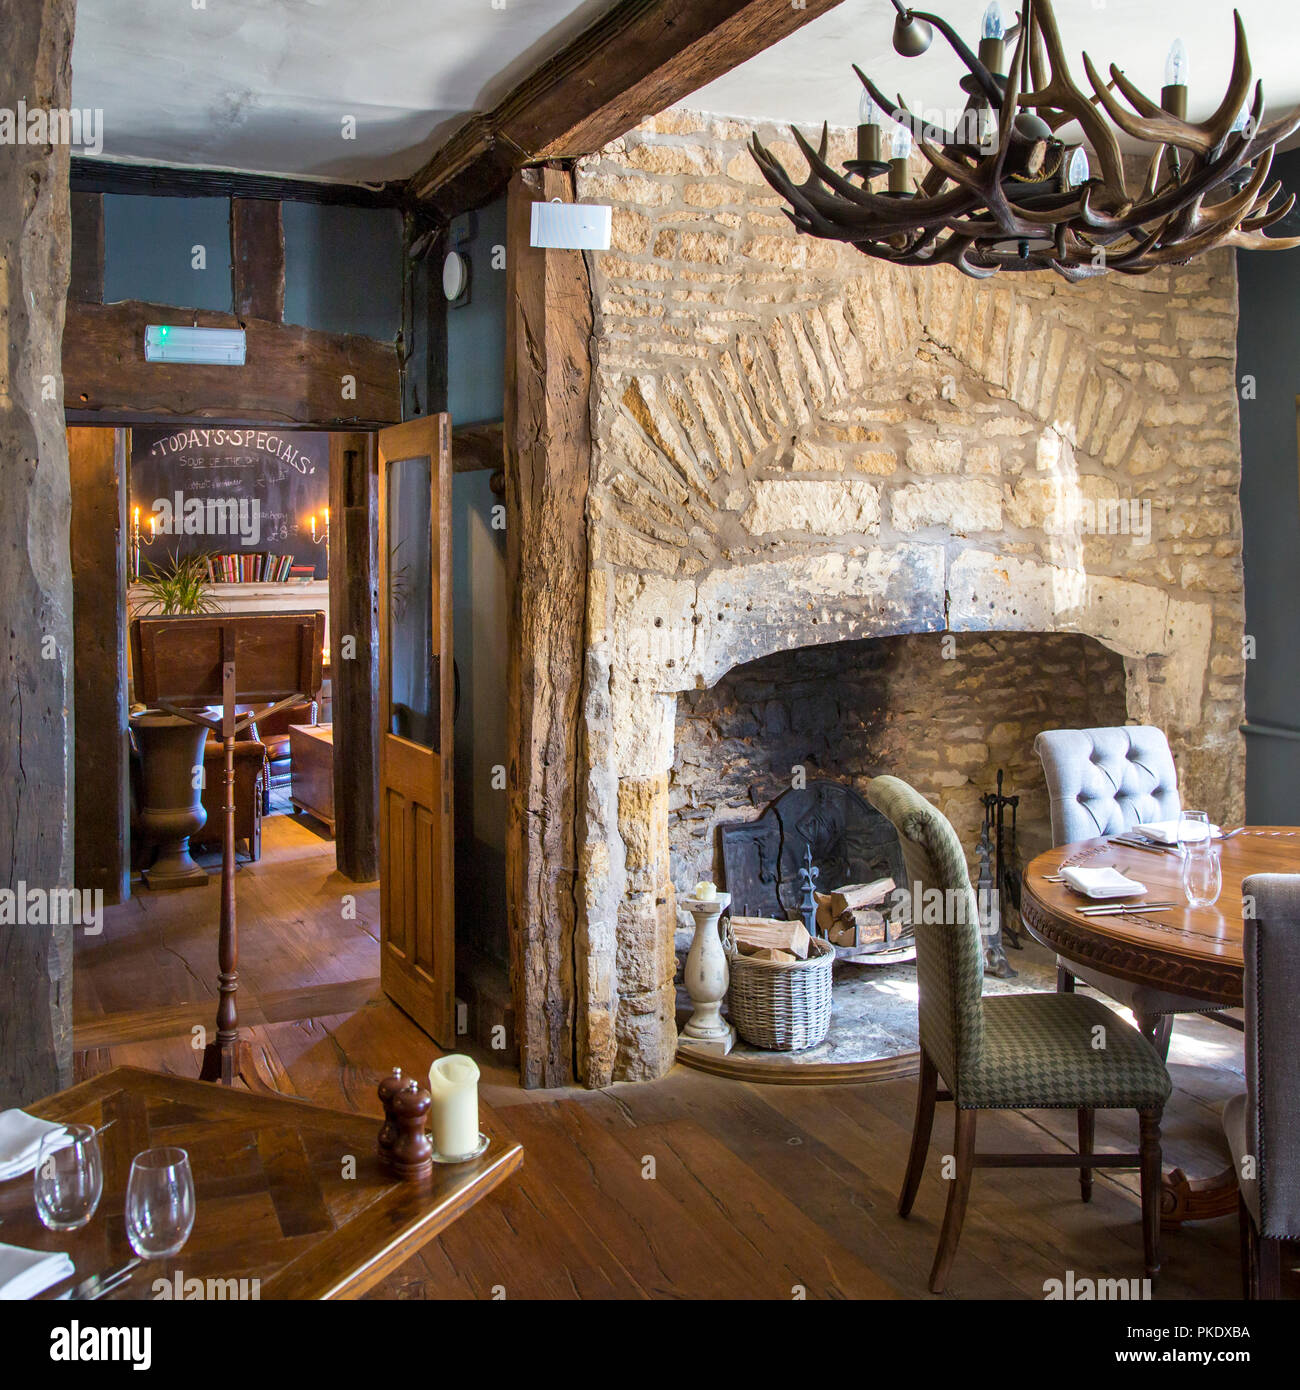 Interior view of the Porch House Pub and Inn - England's oldest c. 947AD, Stow-on-the-Wold, Gloucestershire, England Stock Photo